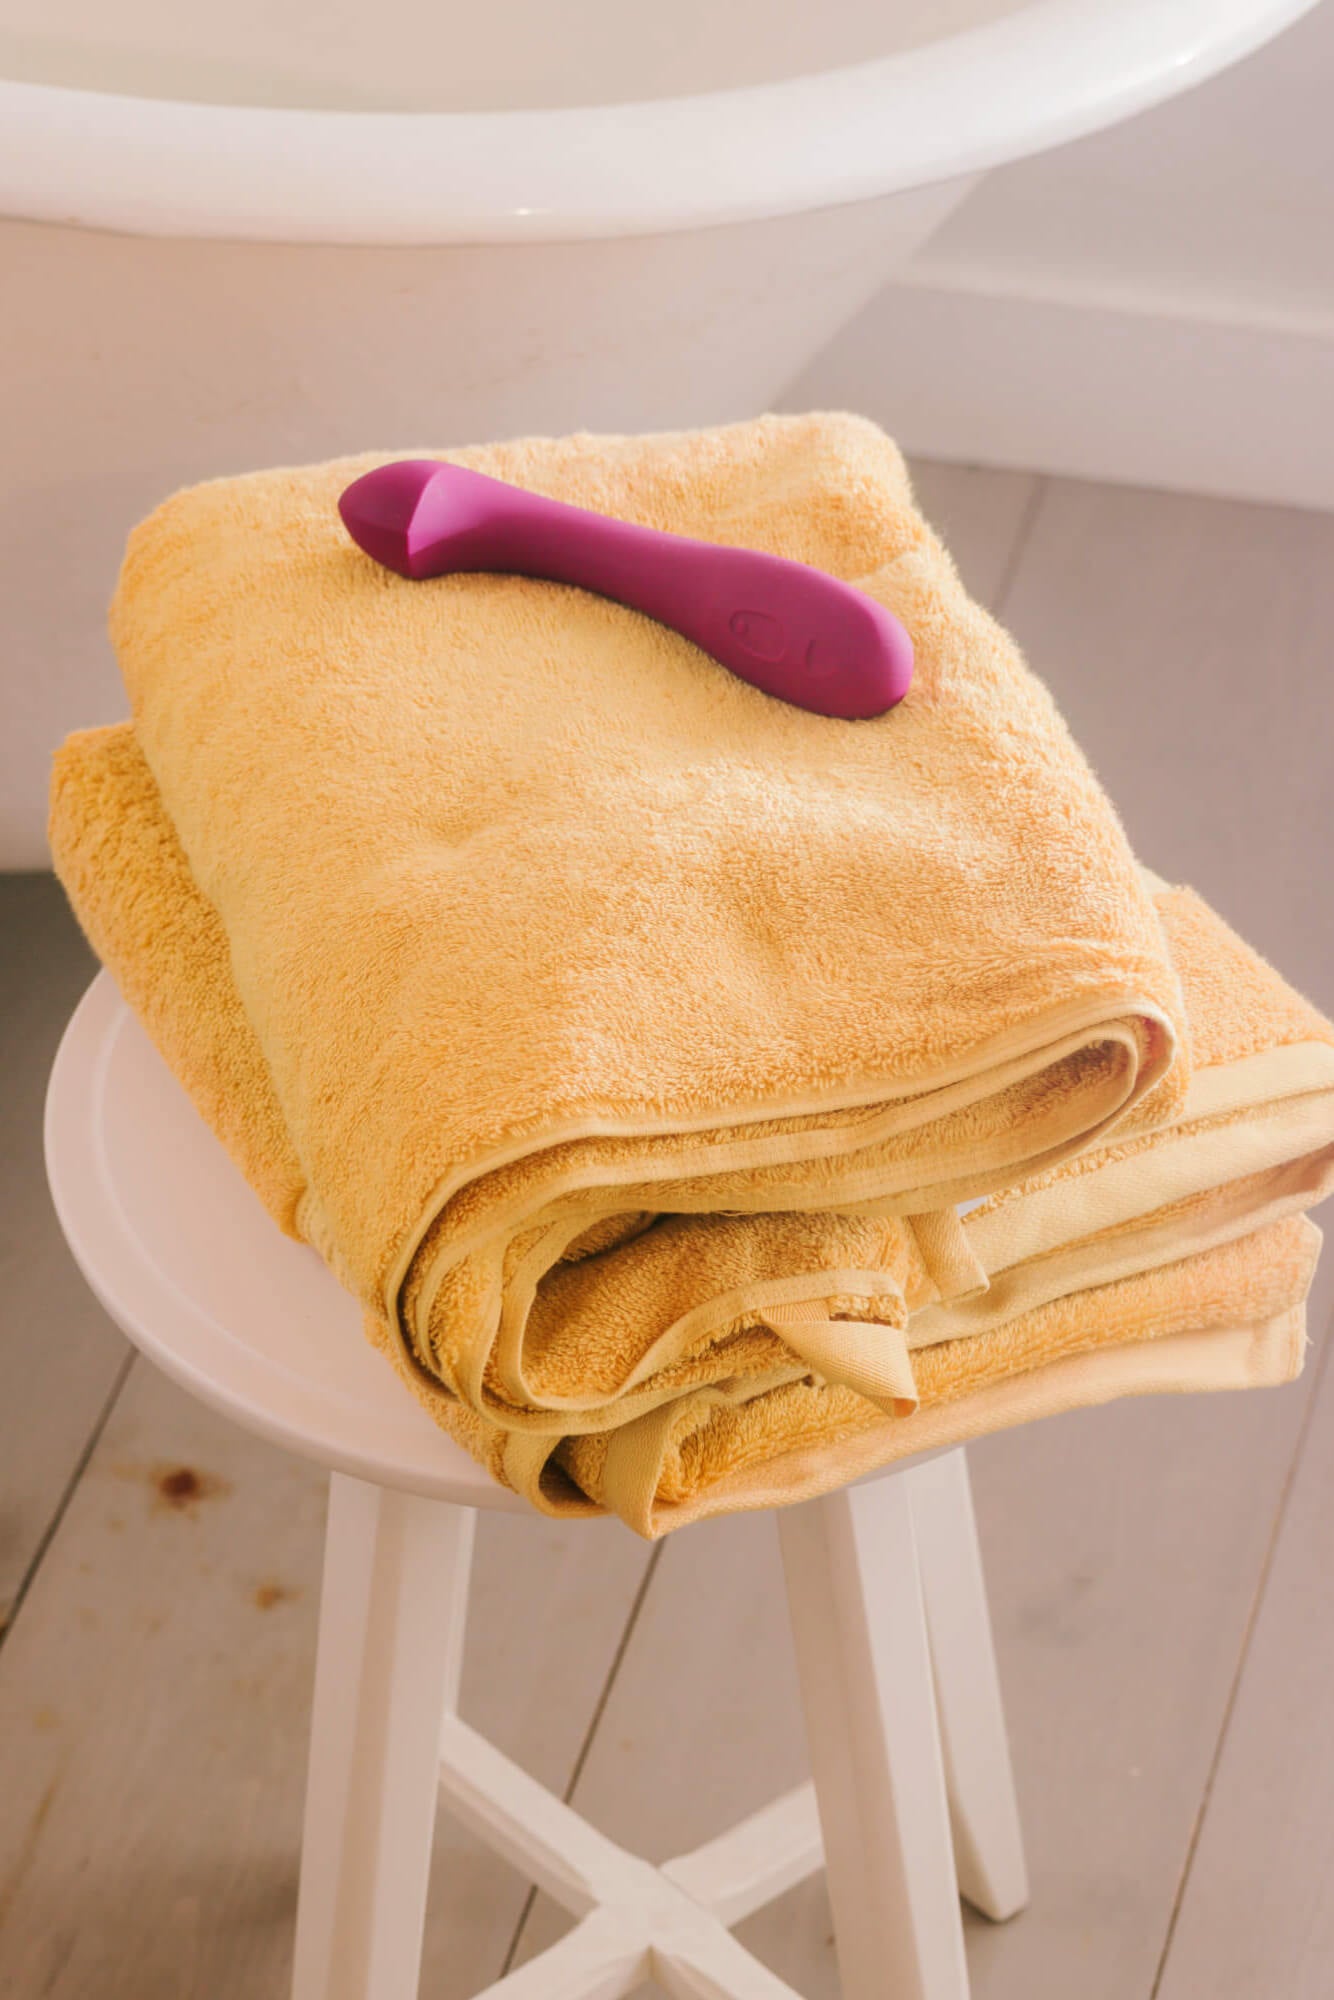 Plum | Arc over a yellow towel